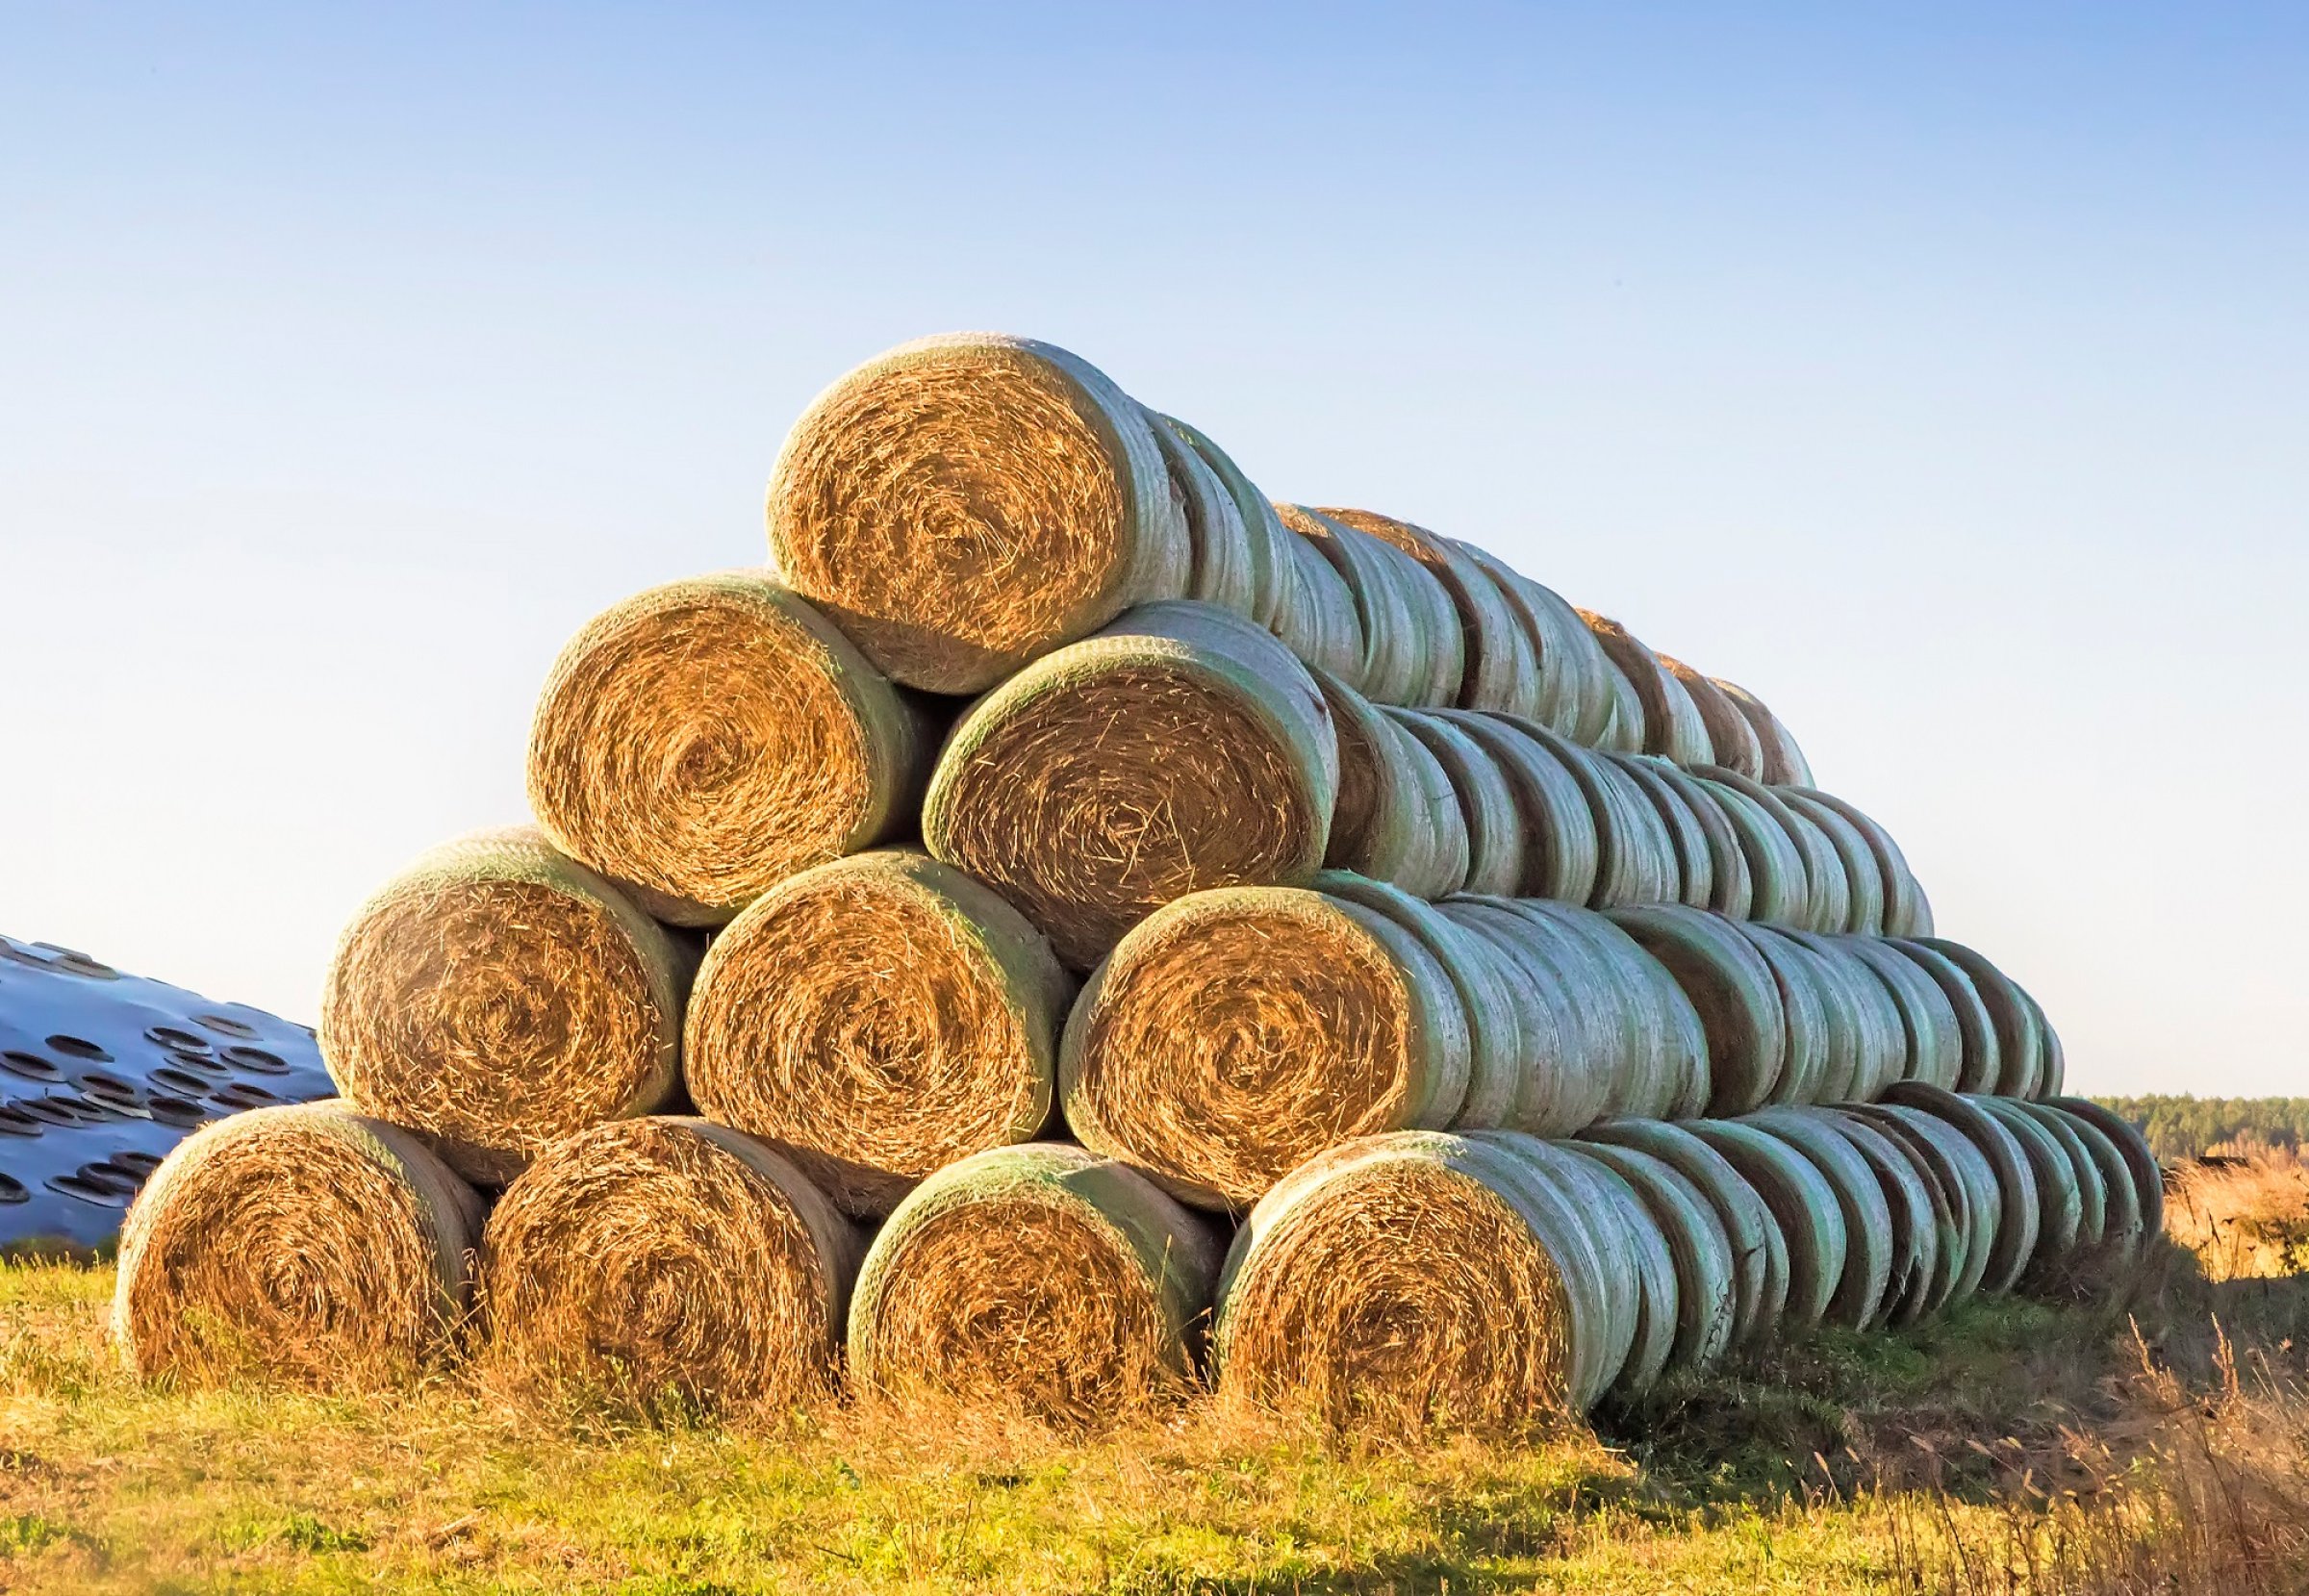 On the field, stacked numerous bales of hay for animal feed.